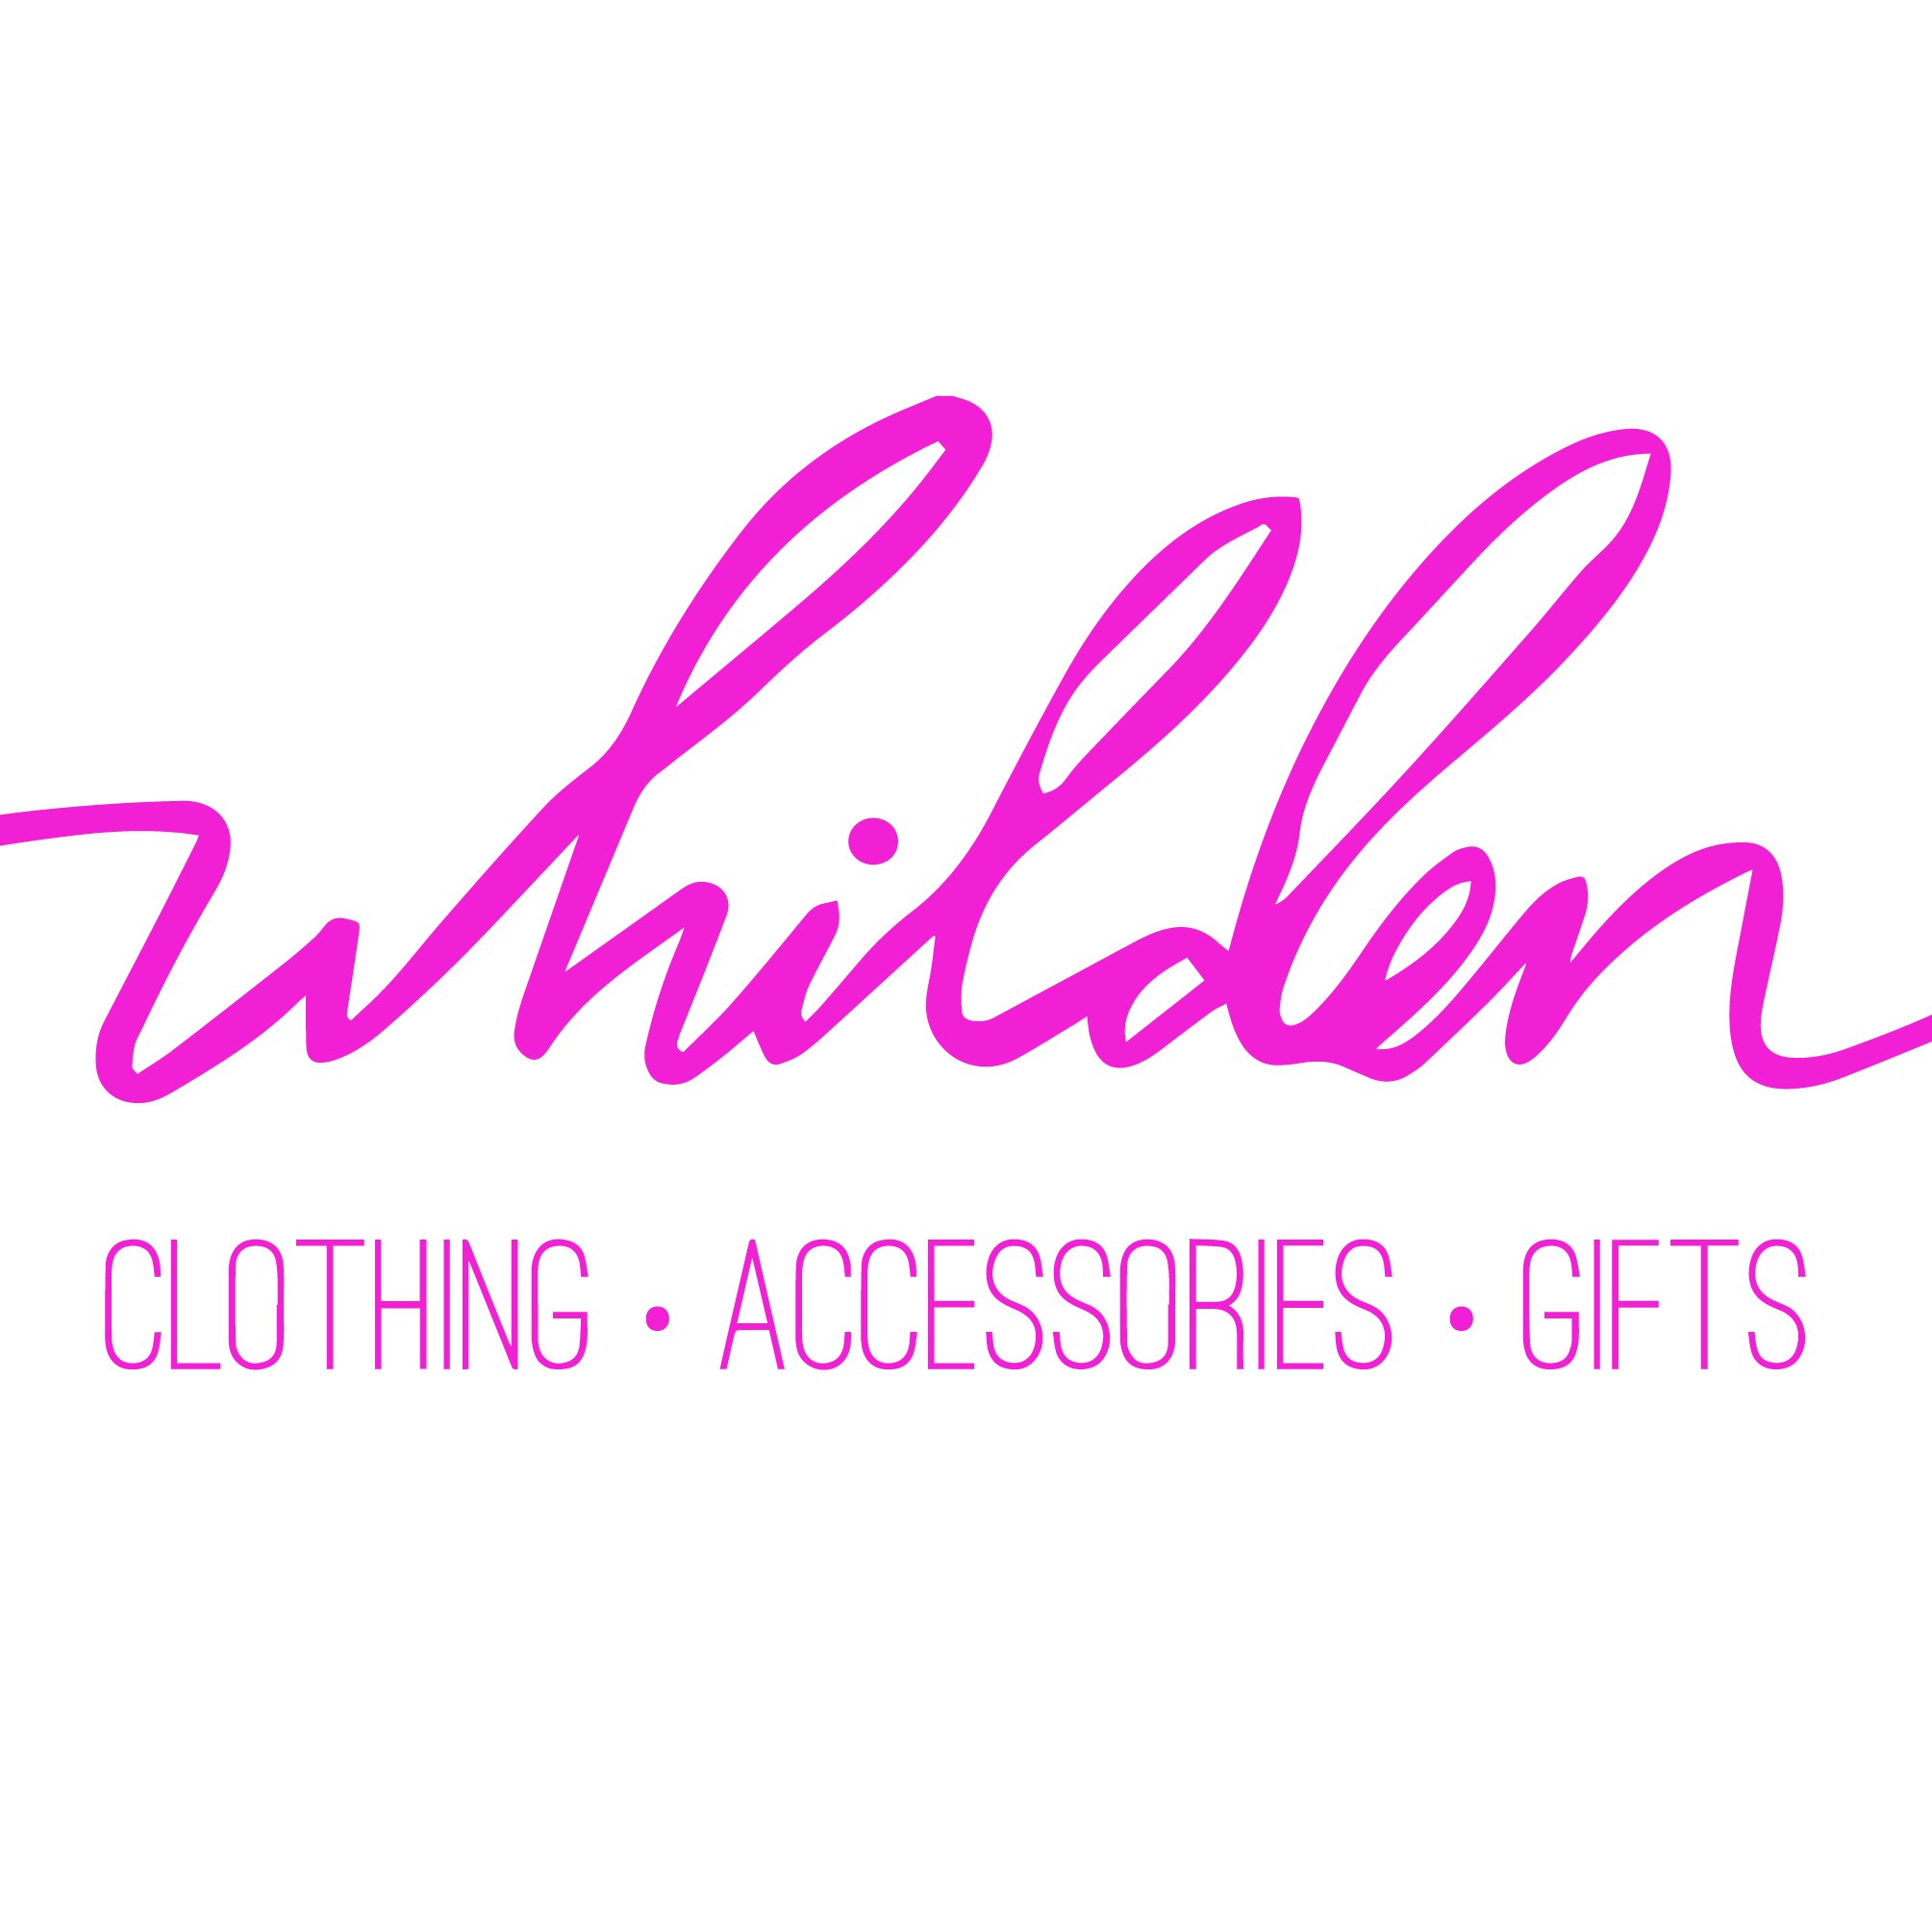 Women's Contemporary Boutique 
Clothing + Accessories + Gifts
400 S Elliott Rd, Chapel Hill, NC